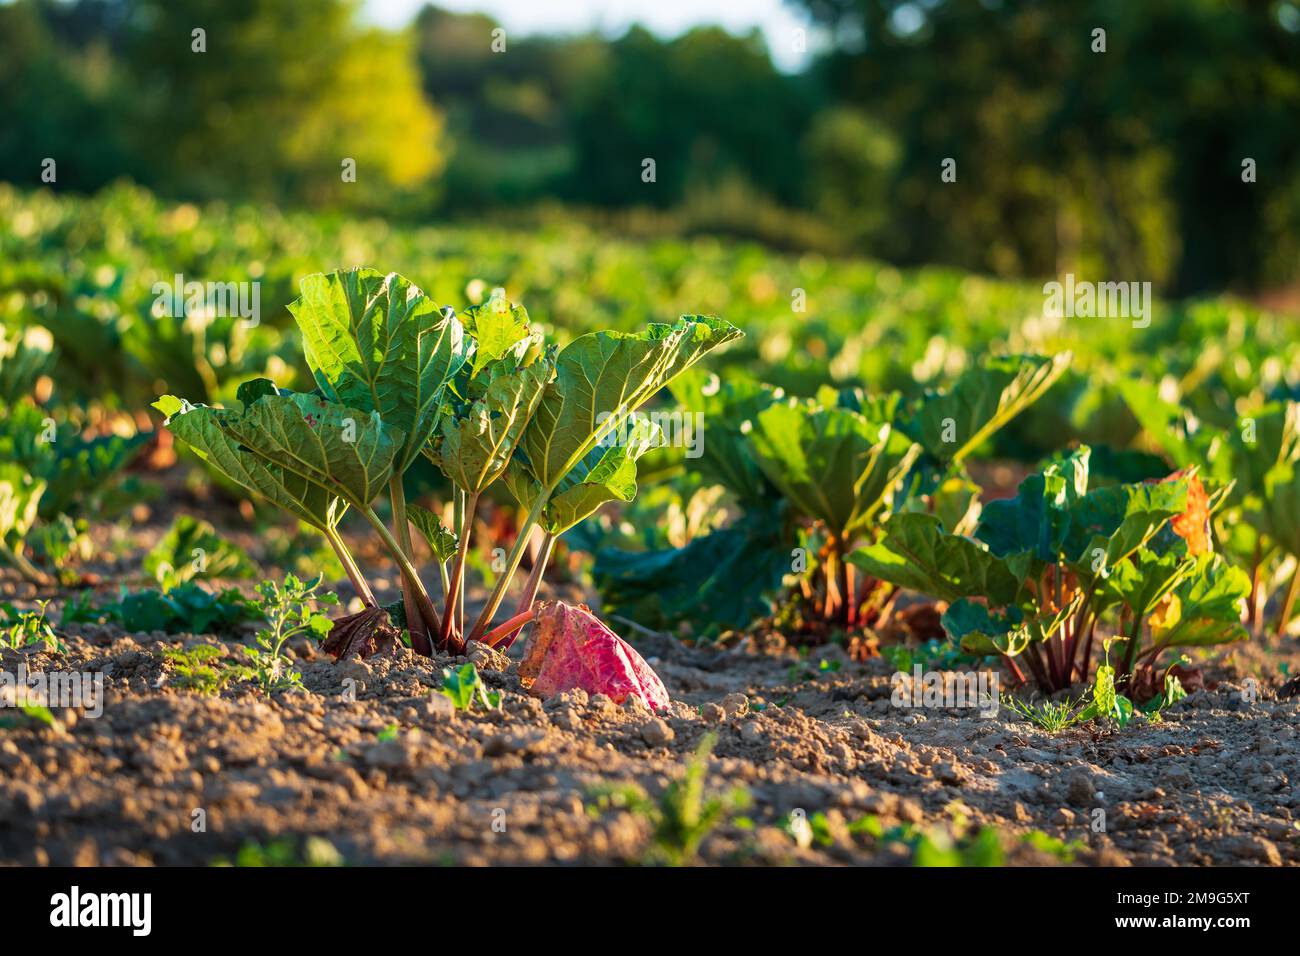 Fresh rhubarb growing in a field at sunrise. Concepts of organic farming, kitchen garden, sustainable vegetable gardening for self-sufficiency Stock Photo